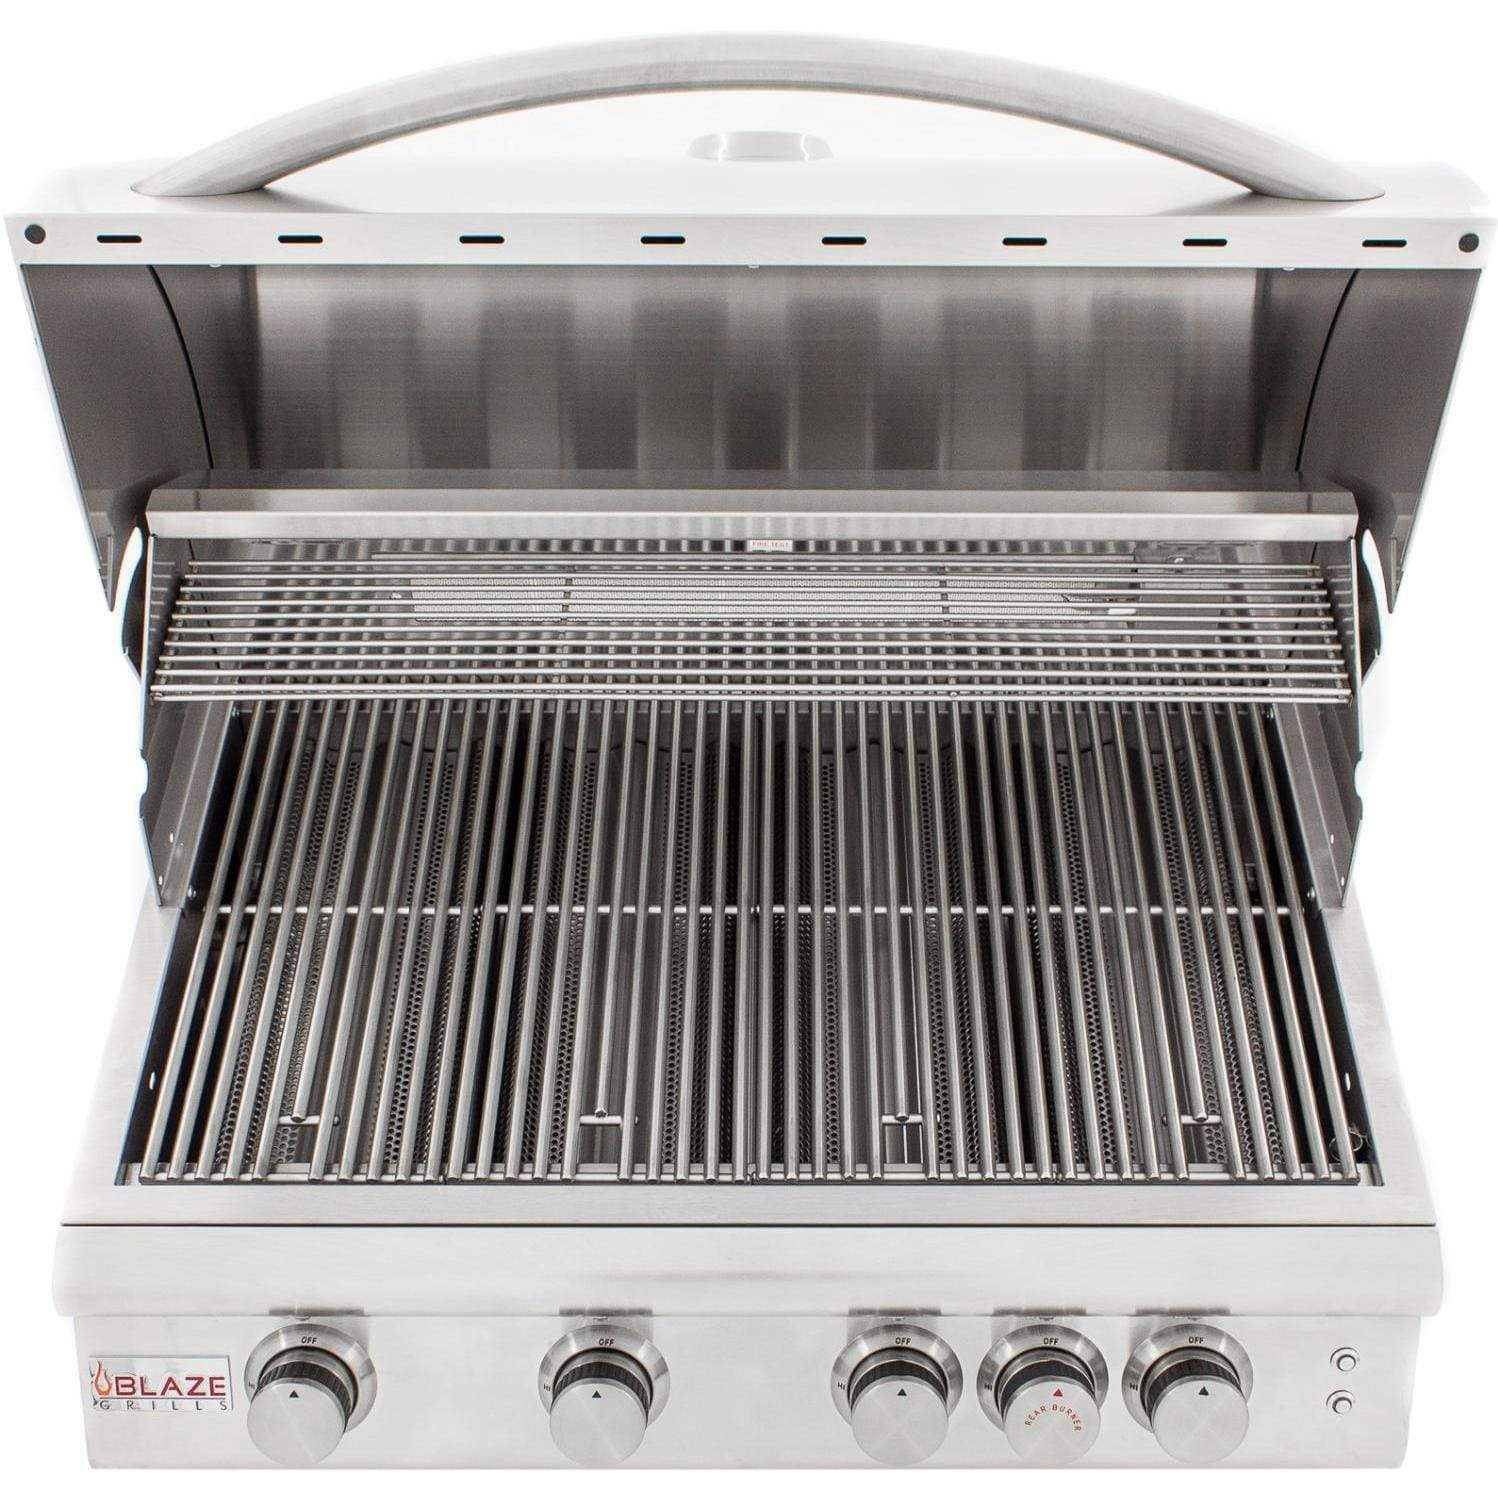 Blaze Premium Gas Grill Blaze Premium LTE 32-Inch 4-Burner |Natural Gas or Propane | Free Standing | Gas Grill With Rear Infrared Burner & Grill Lights - BLZ-4LTE2